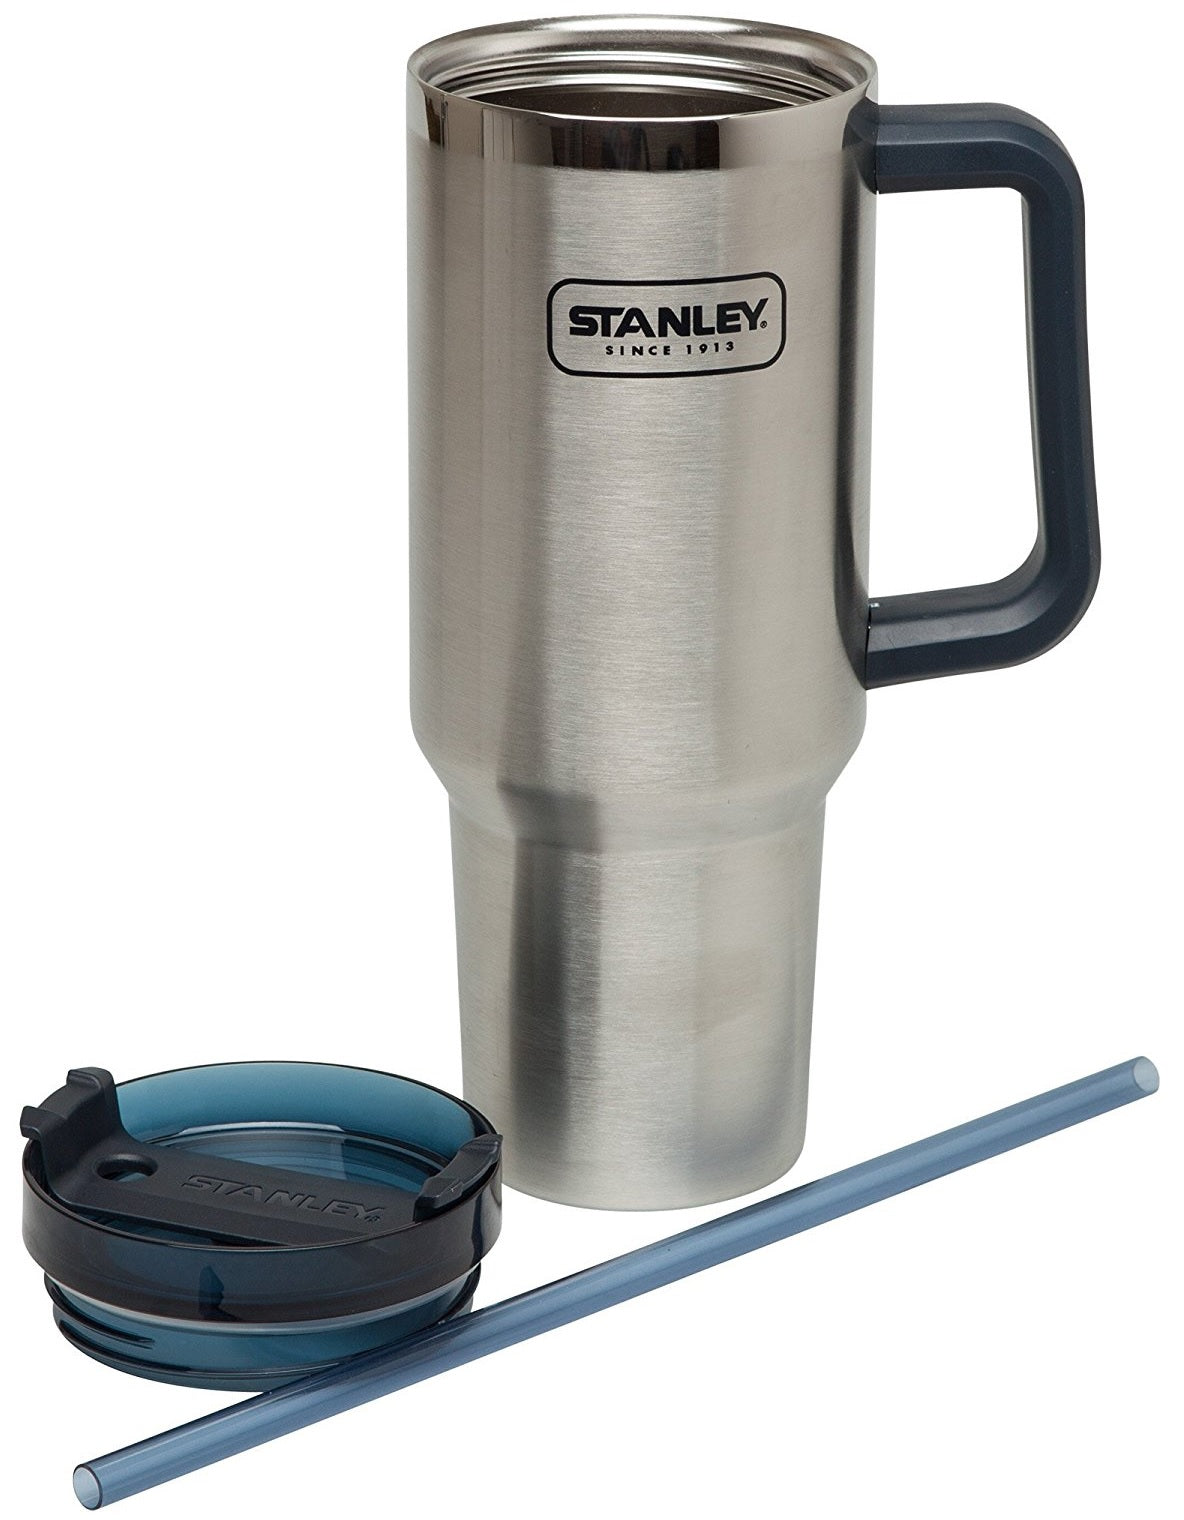 Buy stanley adventure vacuum quencher 40 oz white - Online store for tabletop, mugs in USA, on sale, low price, discount deals, coupon code